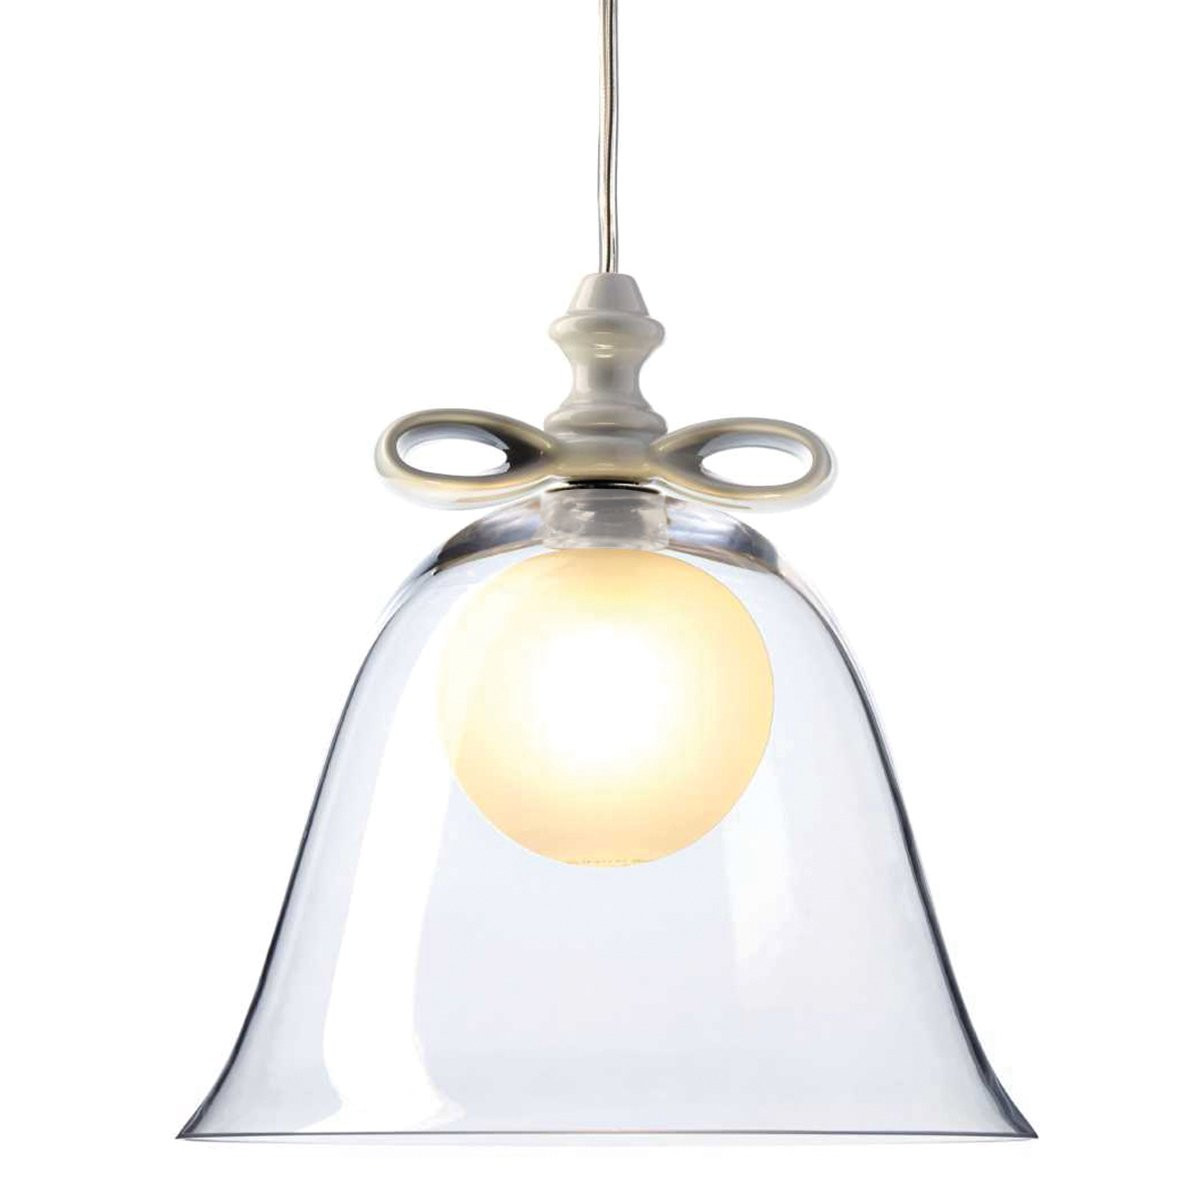 Moooi Bell Hanglamp Small - Transparant/Wit